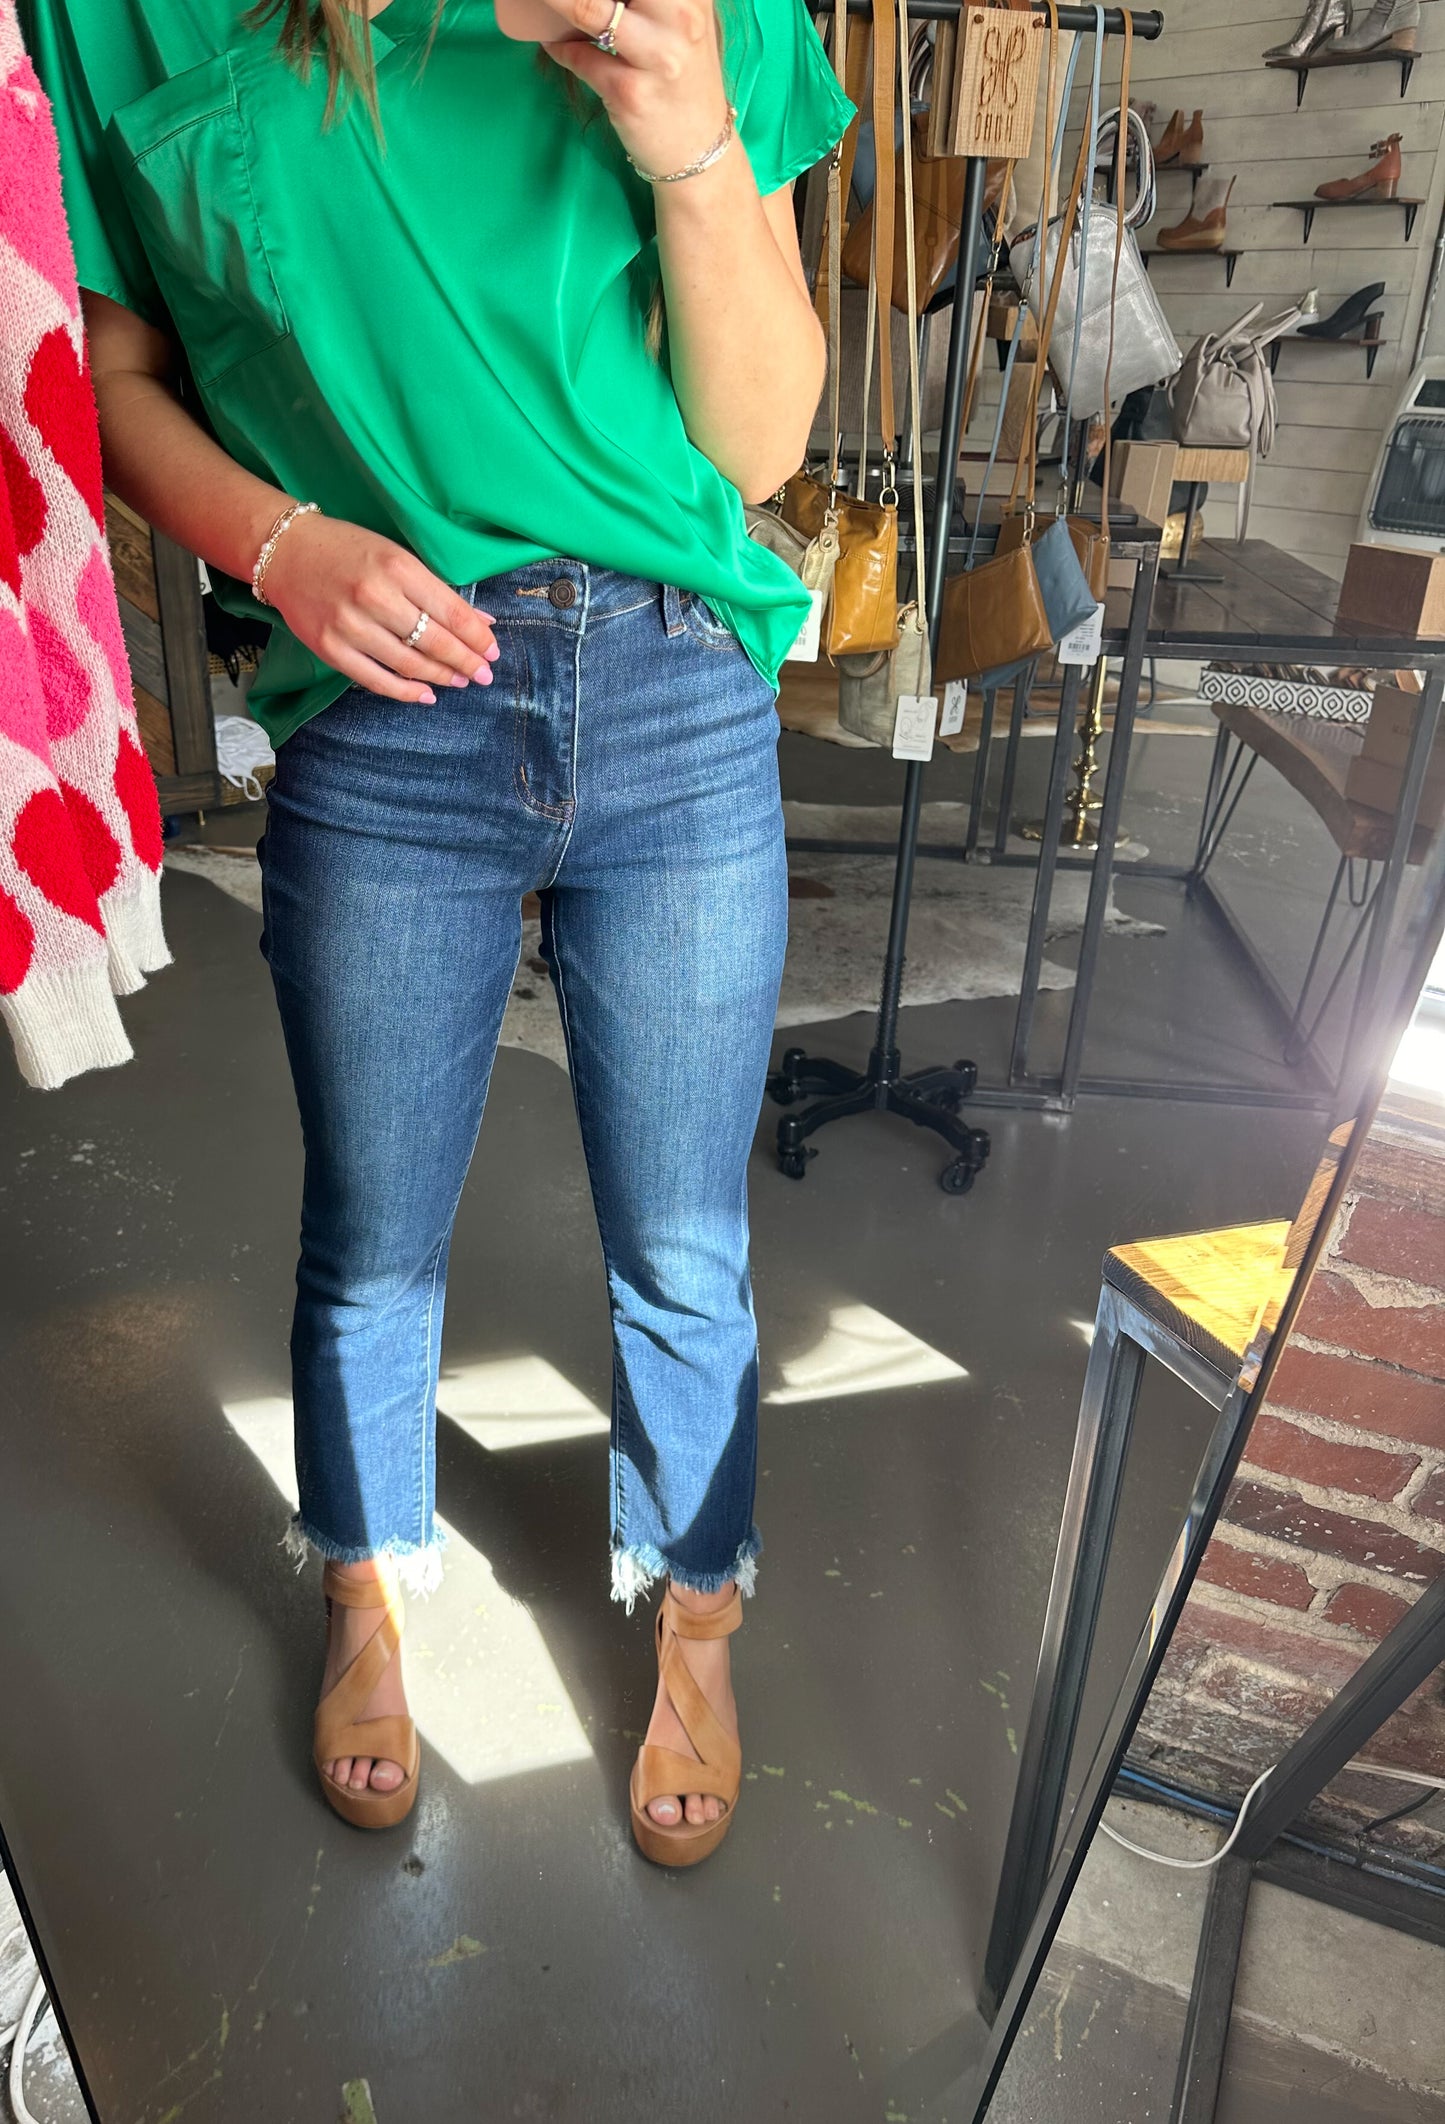 Val High rise flare jeans